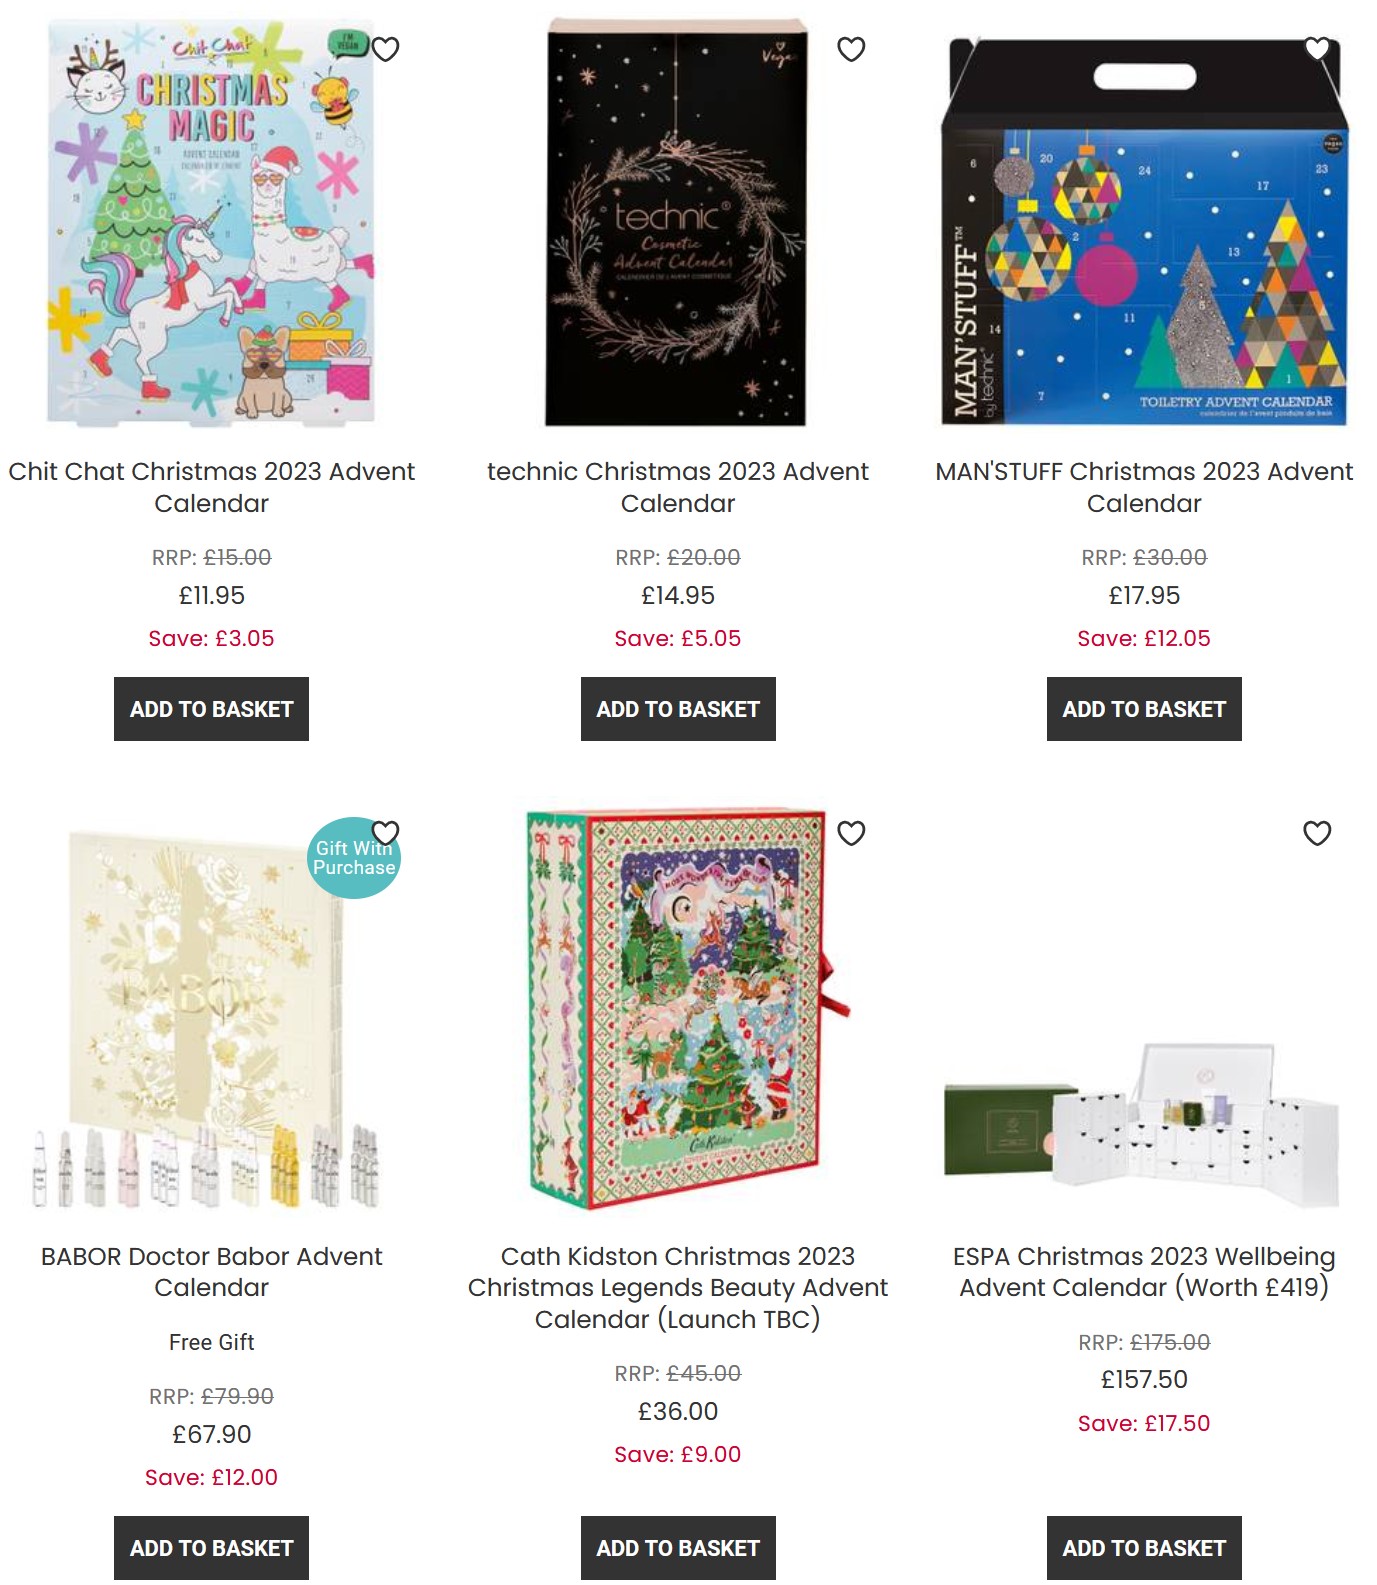 Up to 20% off selected Advent Calendars at Allbeauty